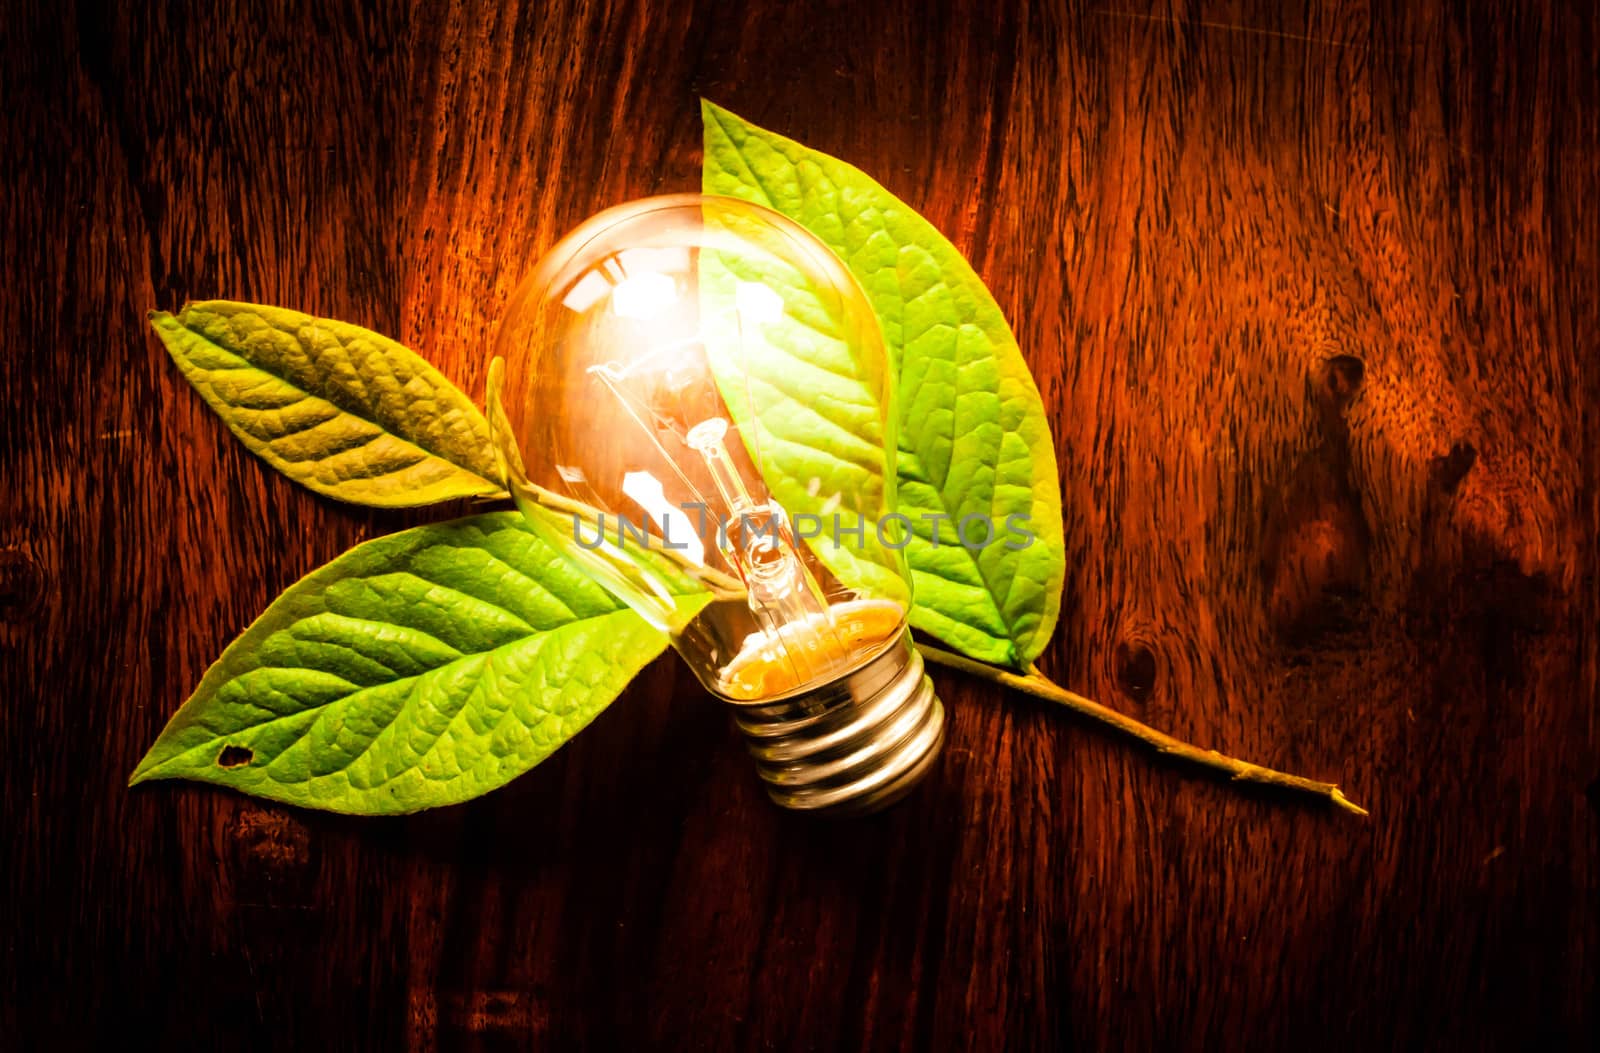 Light bulb on leafs by Sportactive